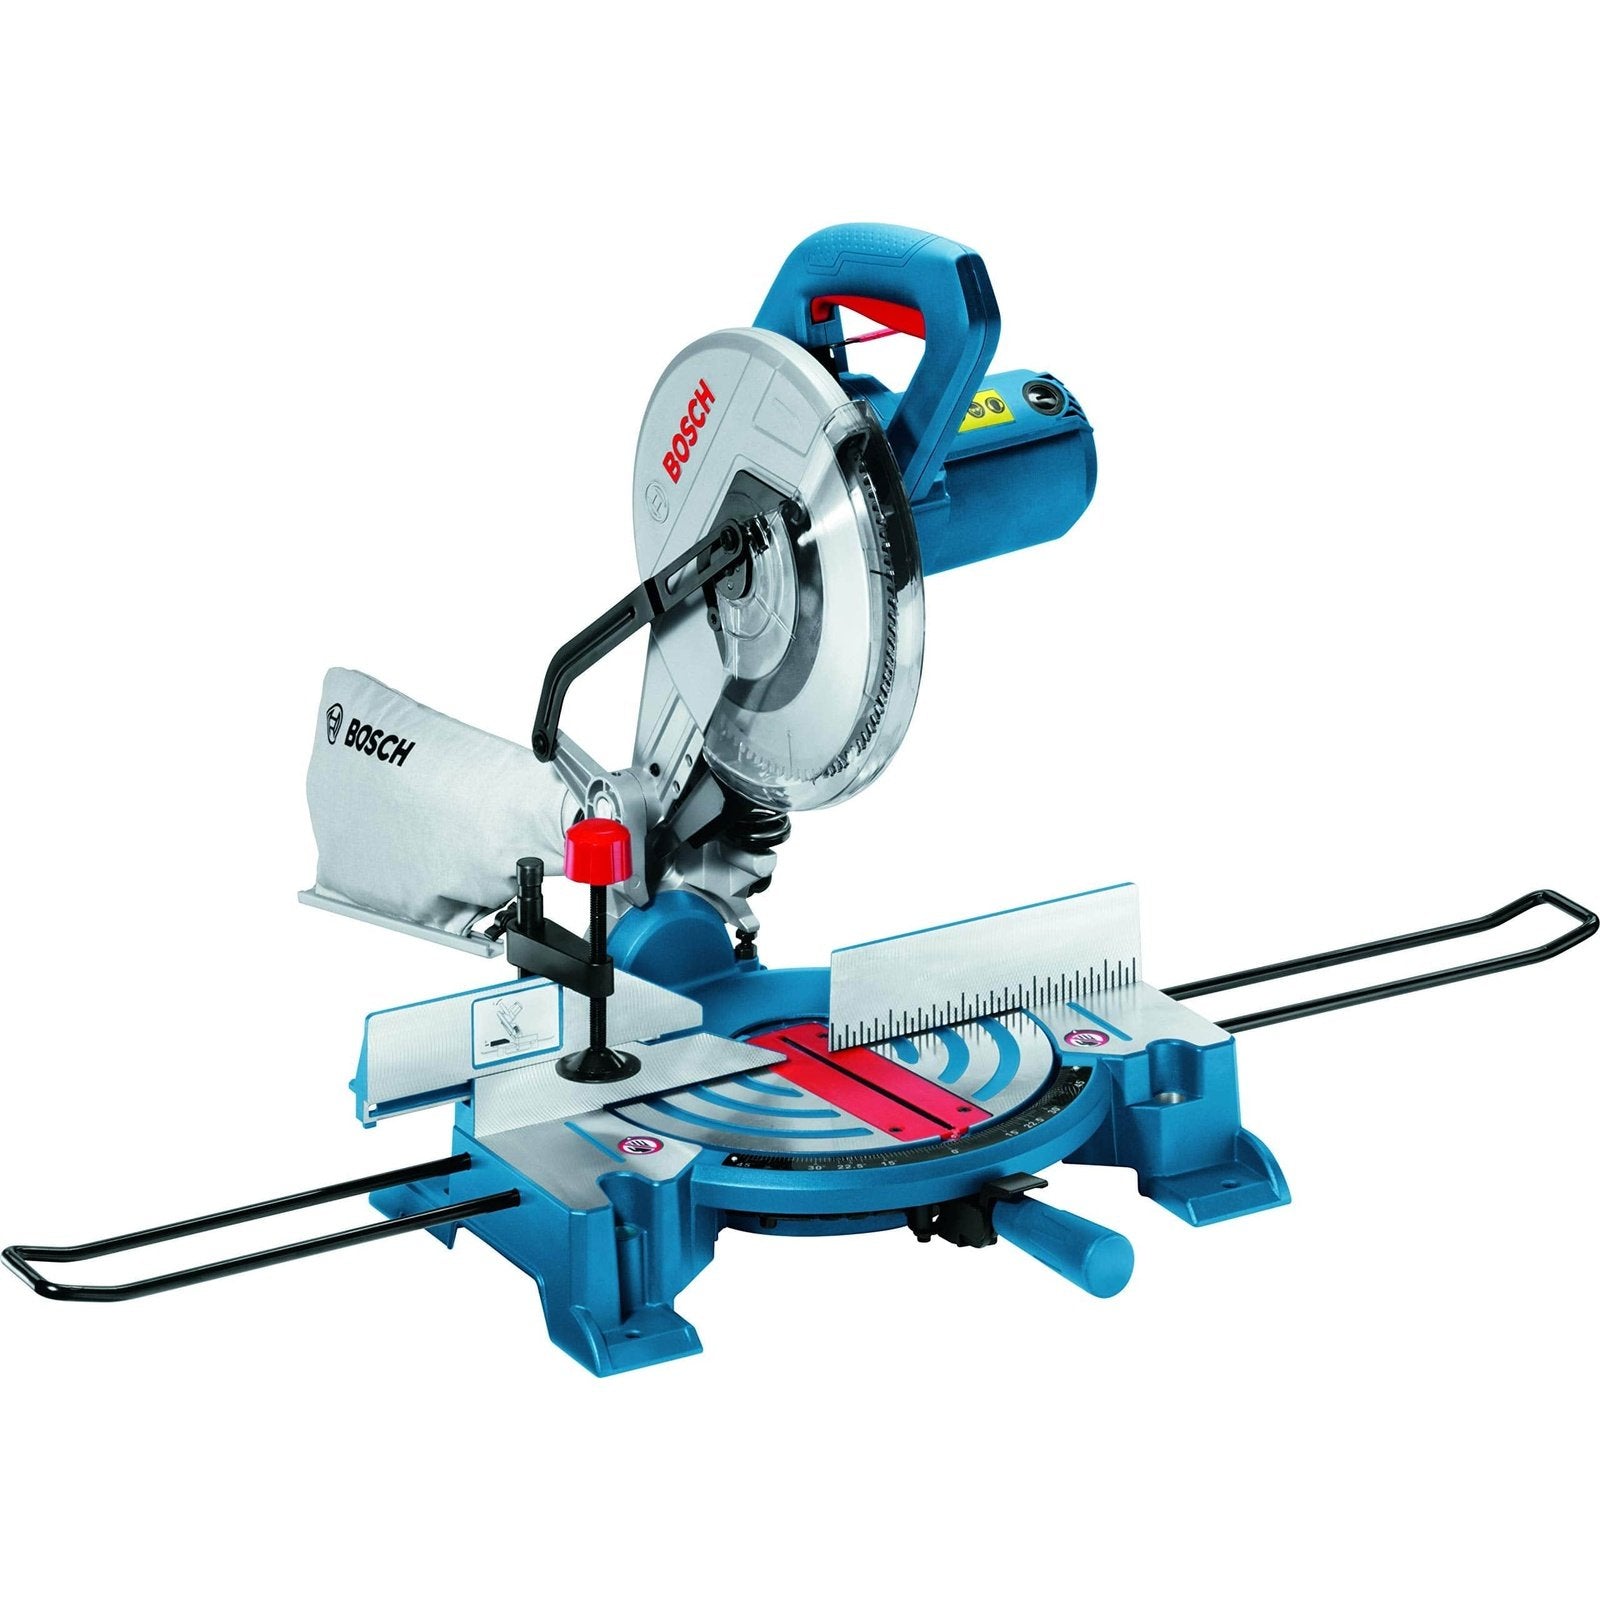 Unlock precision and versatility with the Bosch Mitre Saw 1700W (GCM 10 MX) at SupplyMaster.store in Ghana. Bench & Stationary Tool Buy Tools hardware Building materials